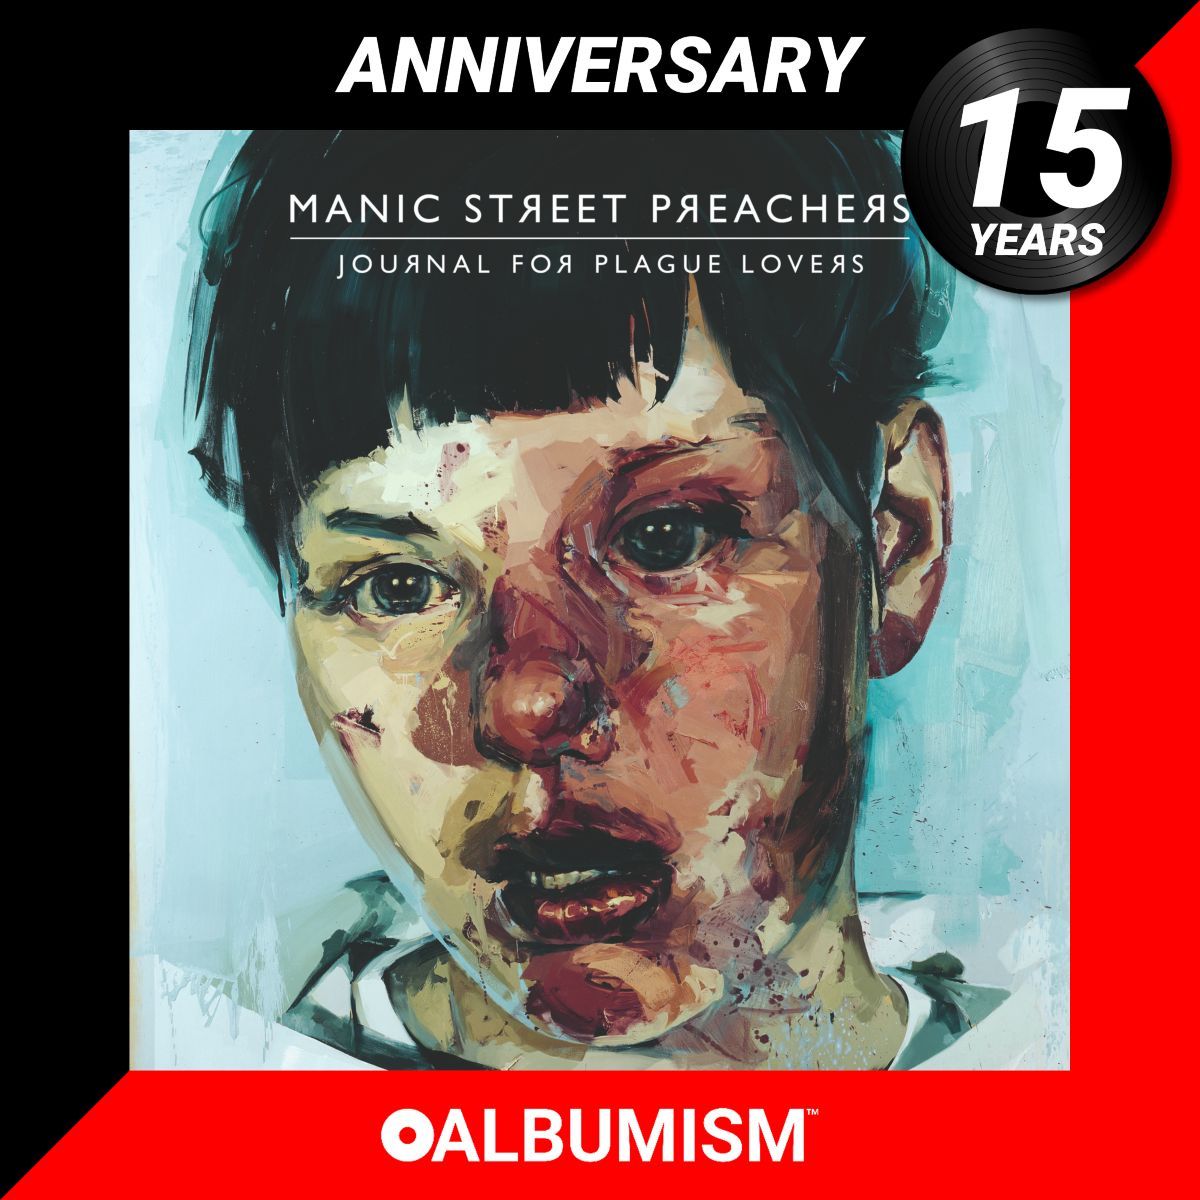 Happy 15th Anniversary to #ManicStreetPreachers' ninth studio album ‘Journal For Plague Lovers ’ originally released May 18, 2009 | Read our tribute by @RiffsandMeaning + listen to the album here: album.ink/MSPjfpl @Manics